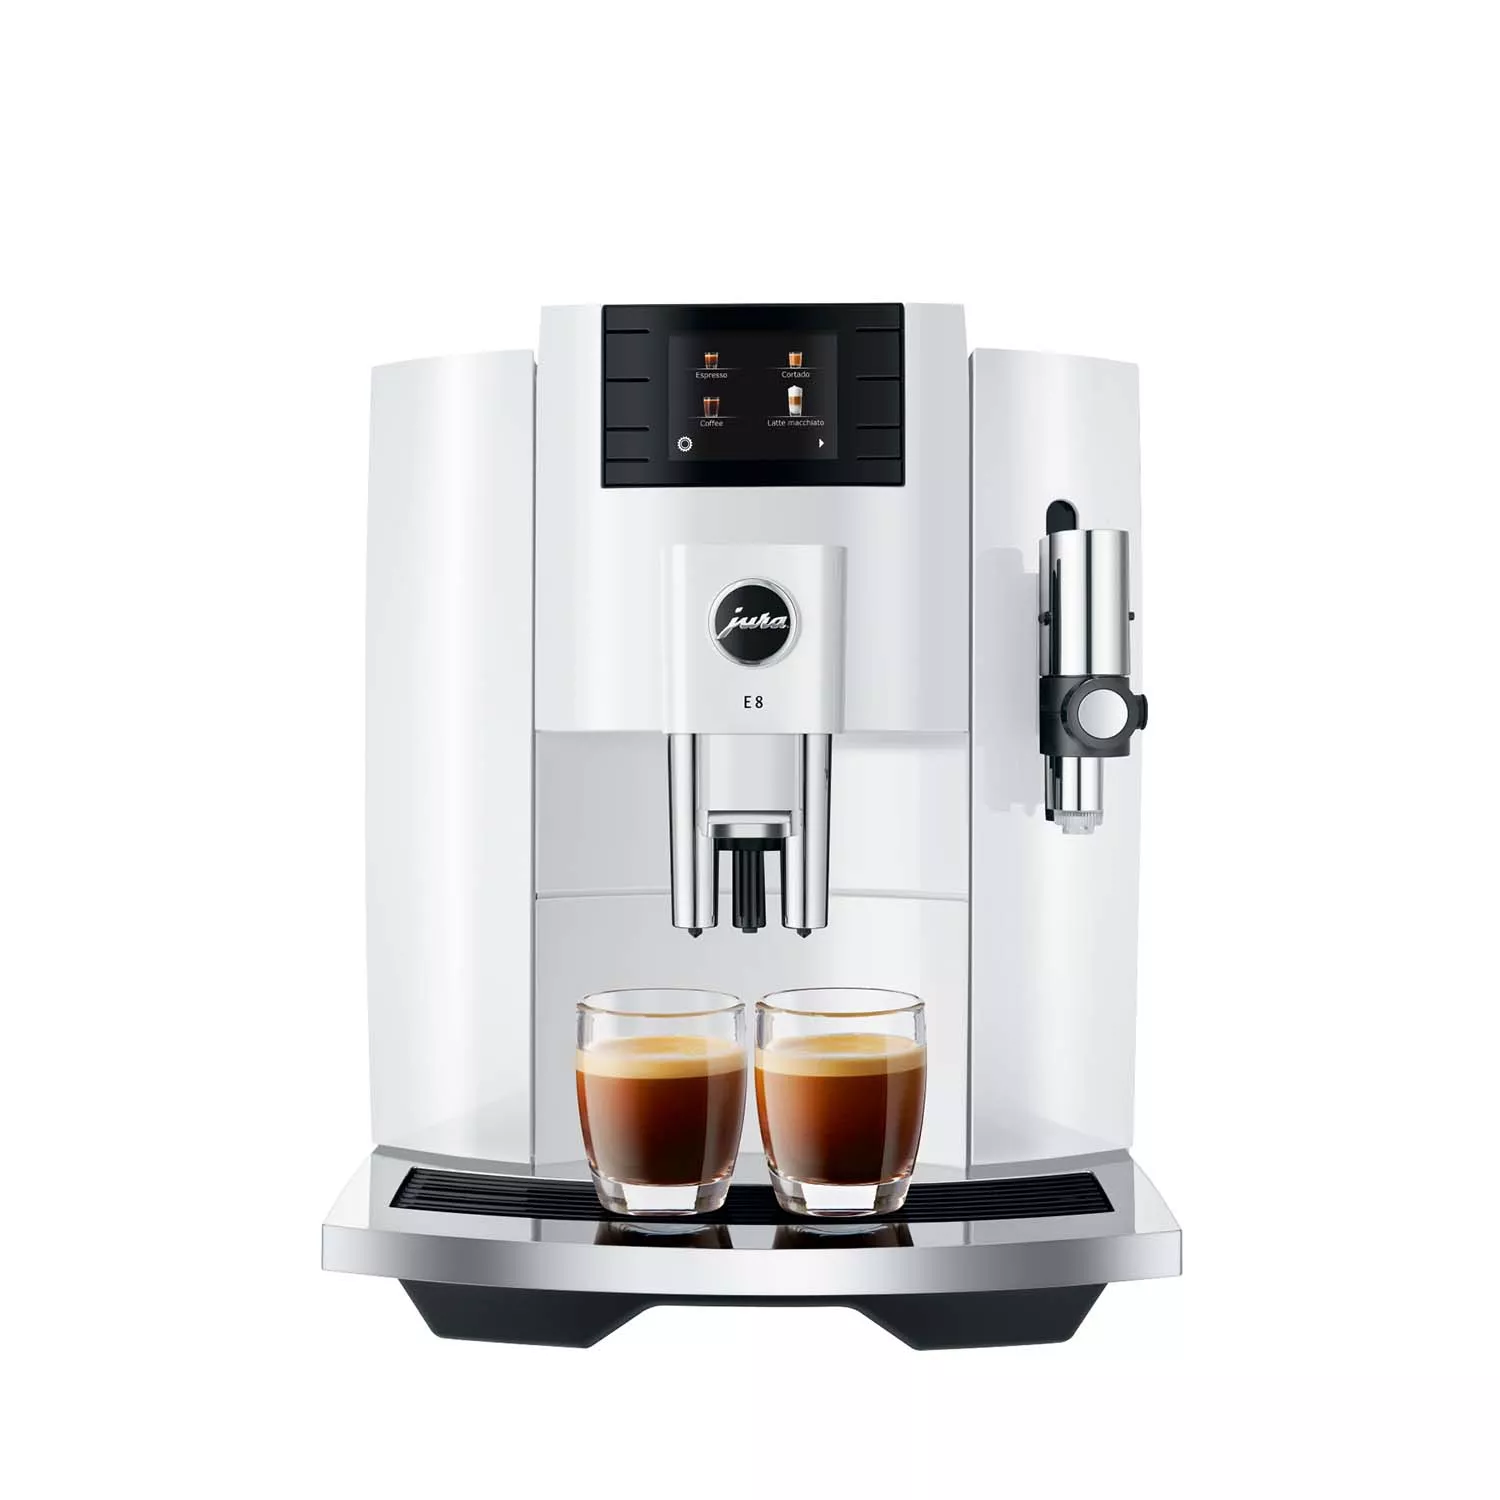 We're so excited that our Wolf Gourmet Coffee Maker has been named